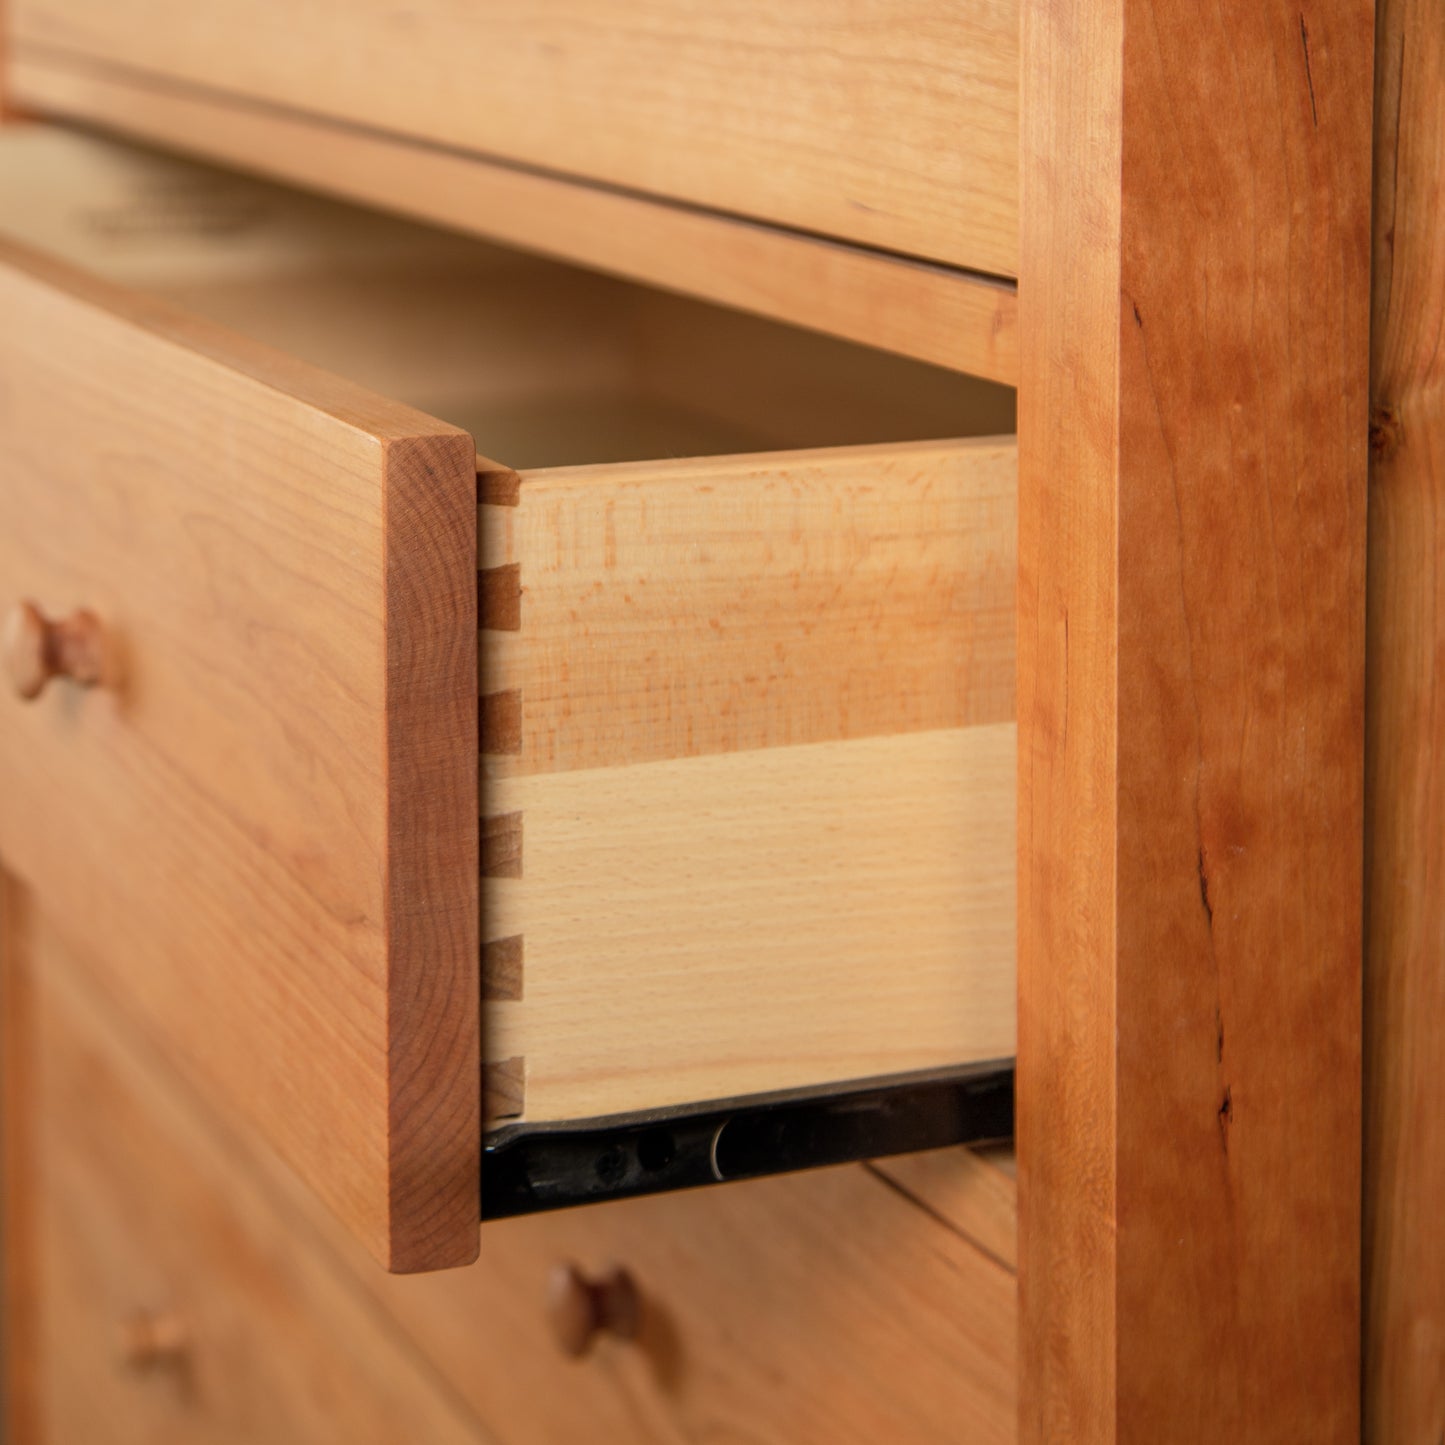 An open Burlington Shaker 6-Drawer Chest demonstrating its dovetail joinery and sliding mechanism by Vermont Furniture Designs.